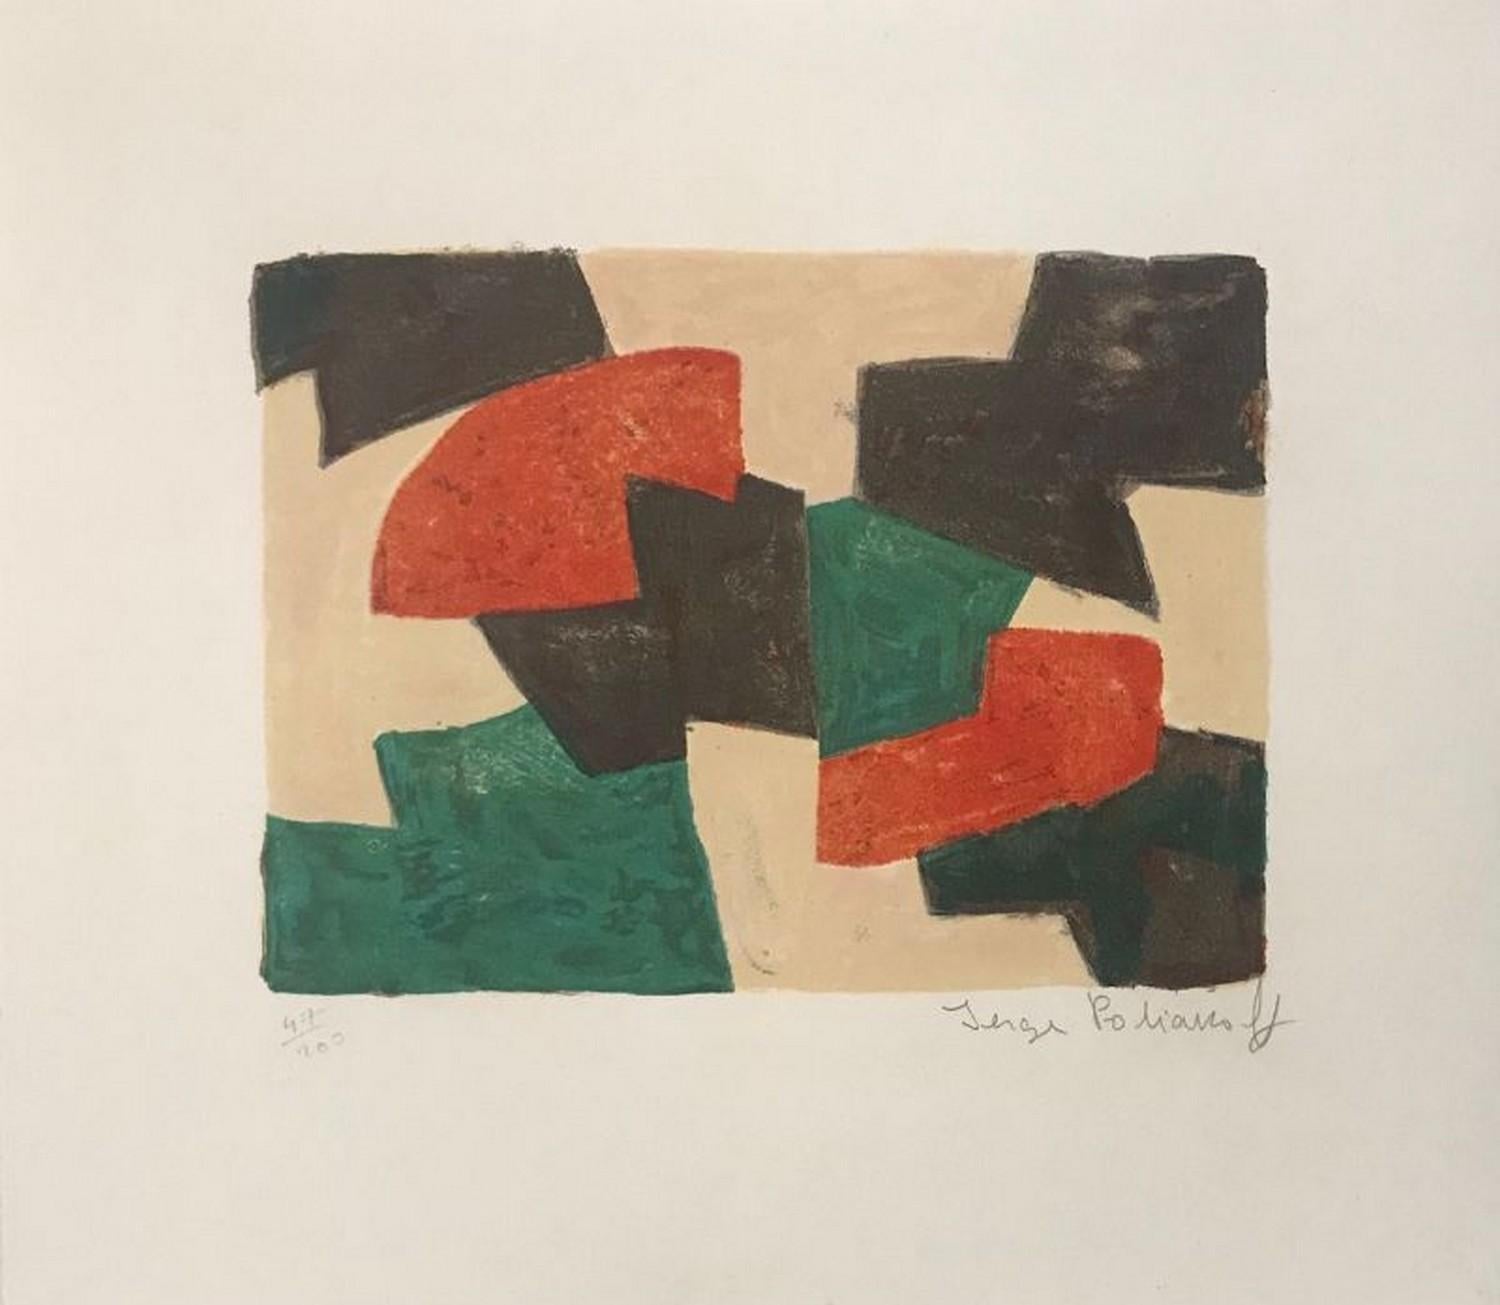 Composition in green, beige, red and brown  - Abstract Print by Serge Poliakoff